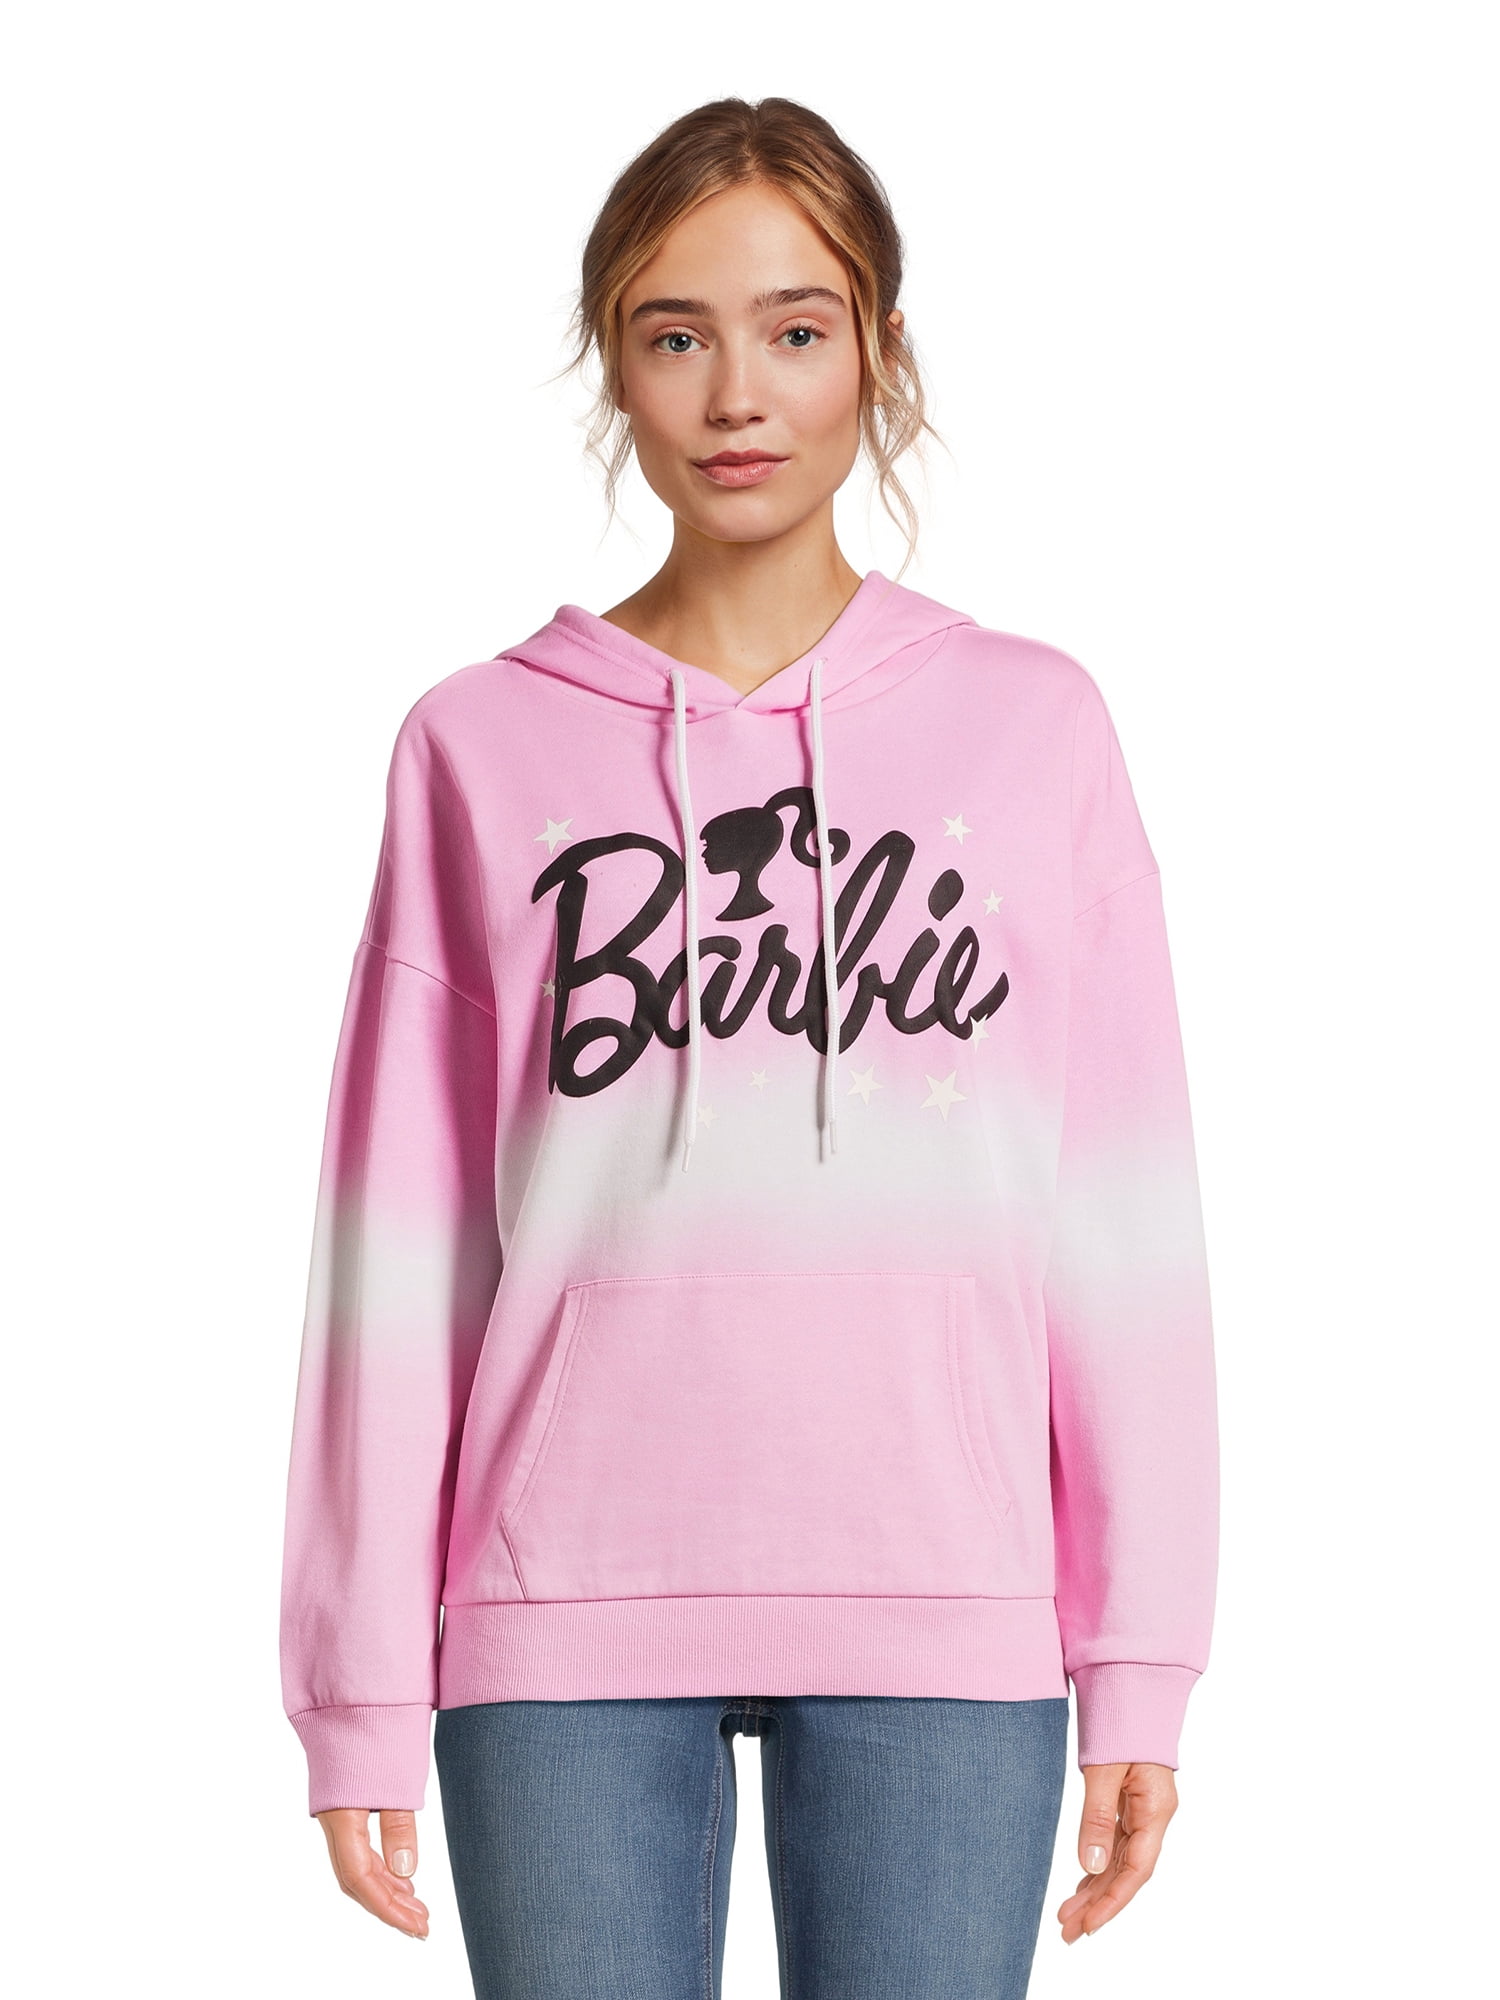 Barbie Juniors Starry Hoodie with Long Sleeves, Size XS-3XL